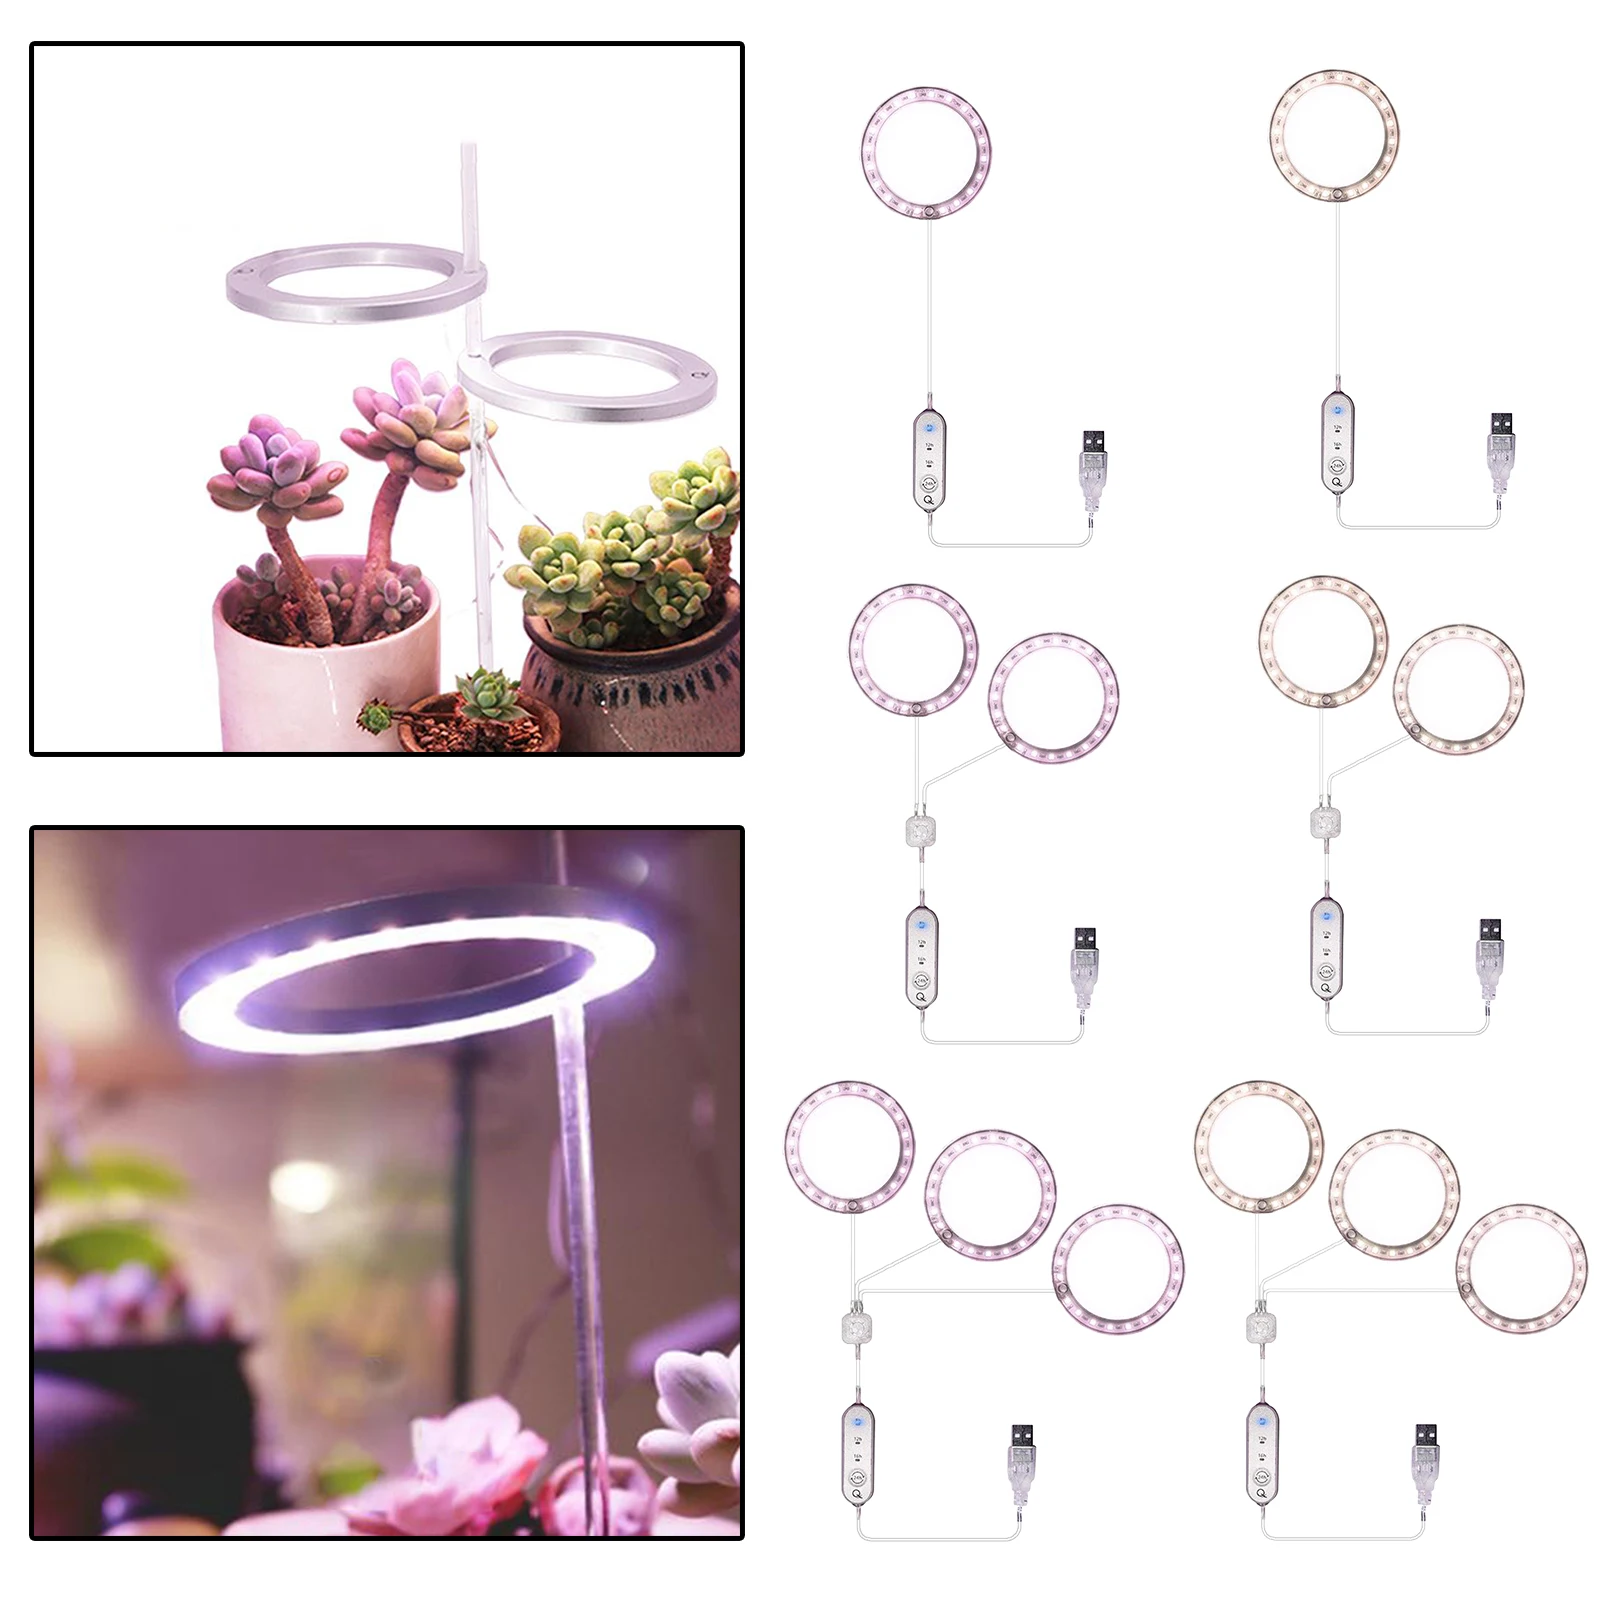 Full Spectrum Grow Light Indoor Desktop Plant Growth Lamp 20 Beads with Acrylic Rod, Up to 50000hours